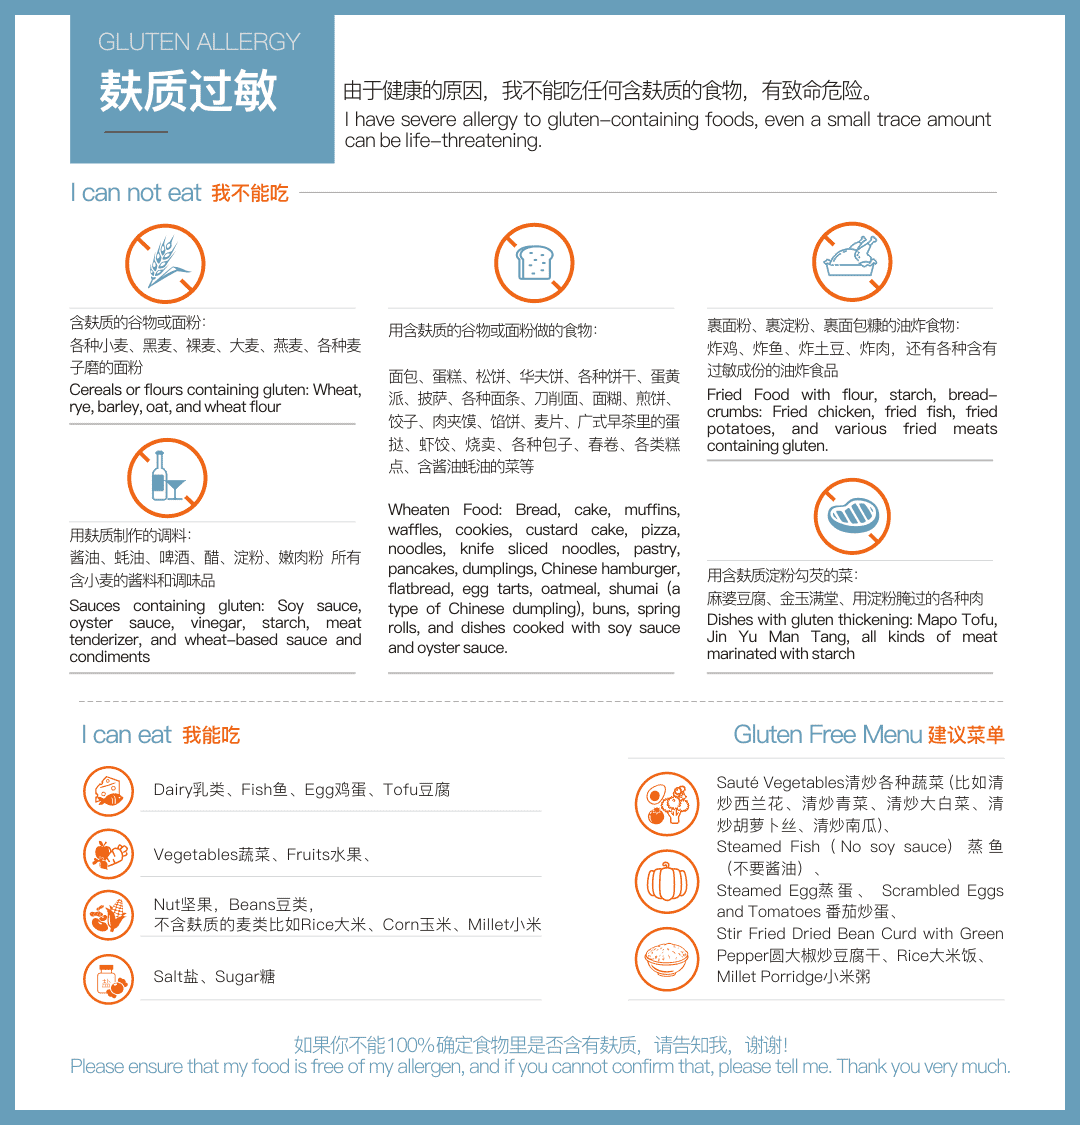 Gluten Allergy Translation Card in Chinese